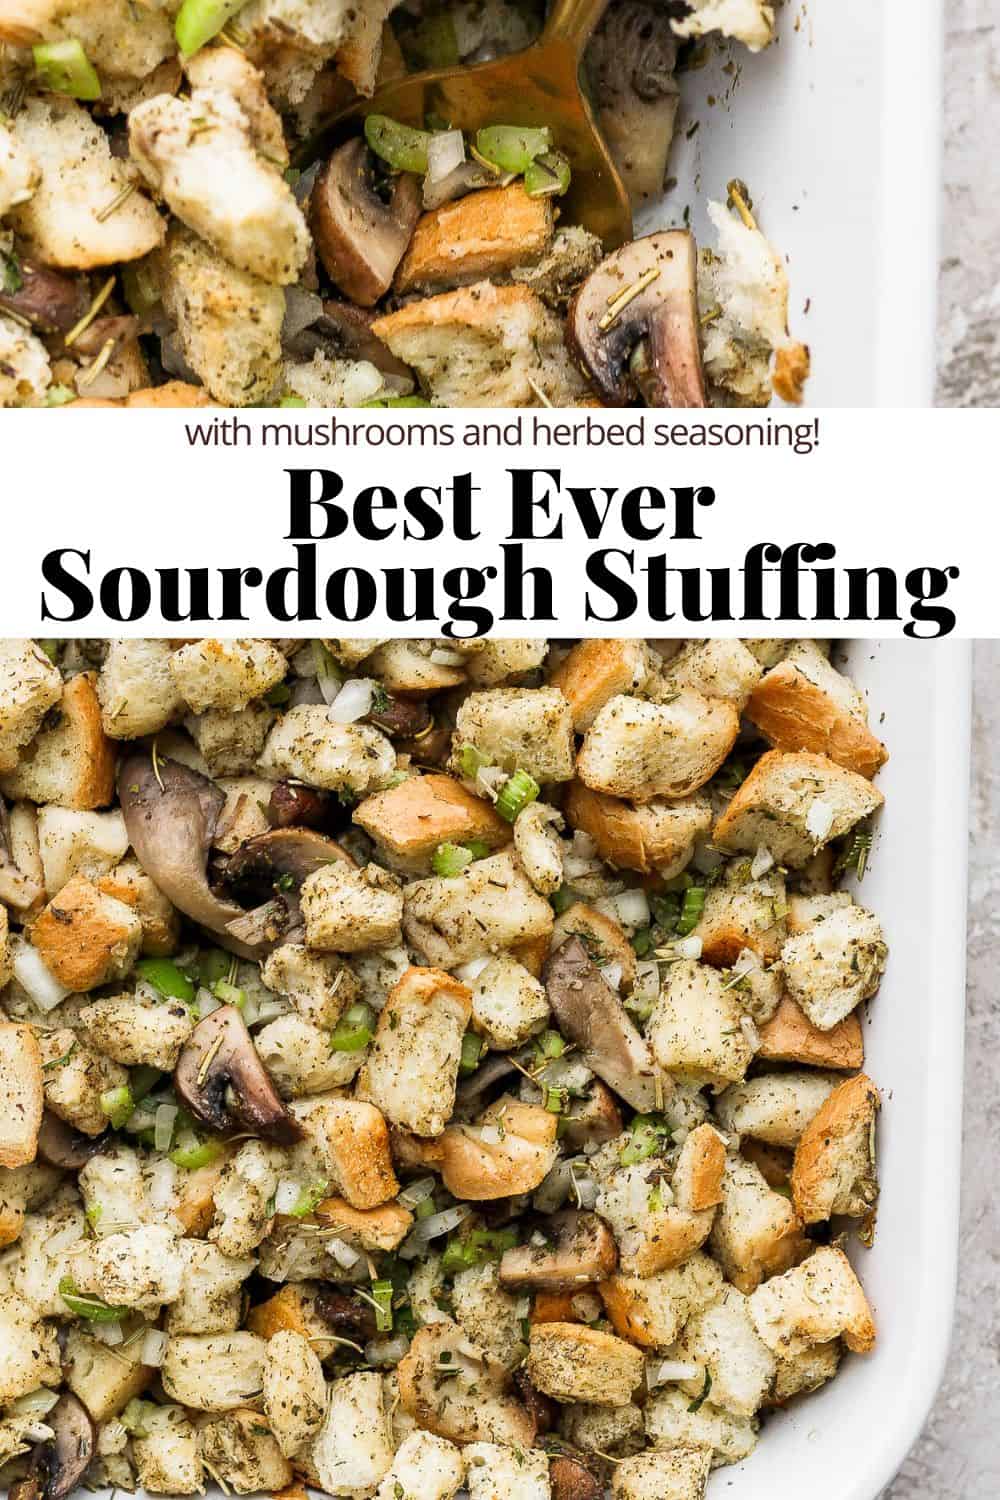 Pinterest image for the best ever sourdough stuffing recipe.